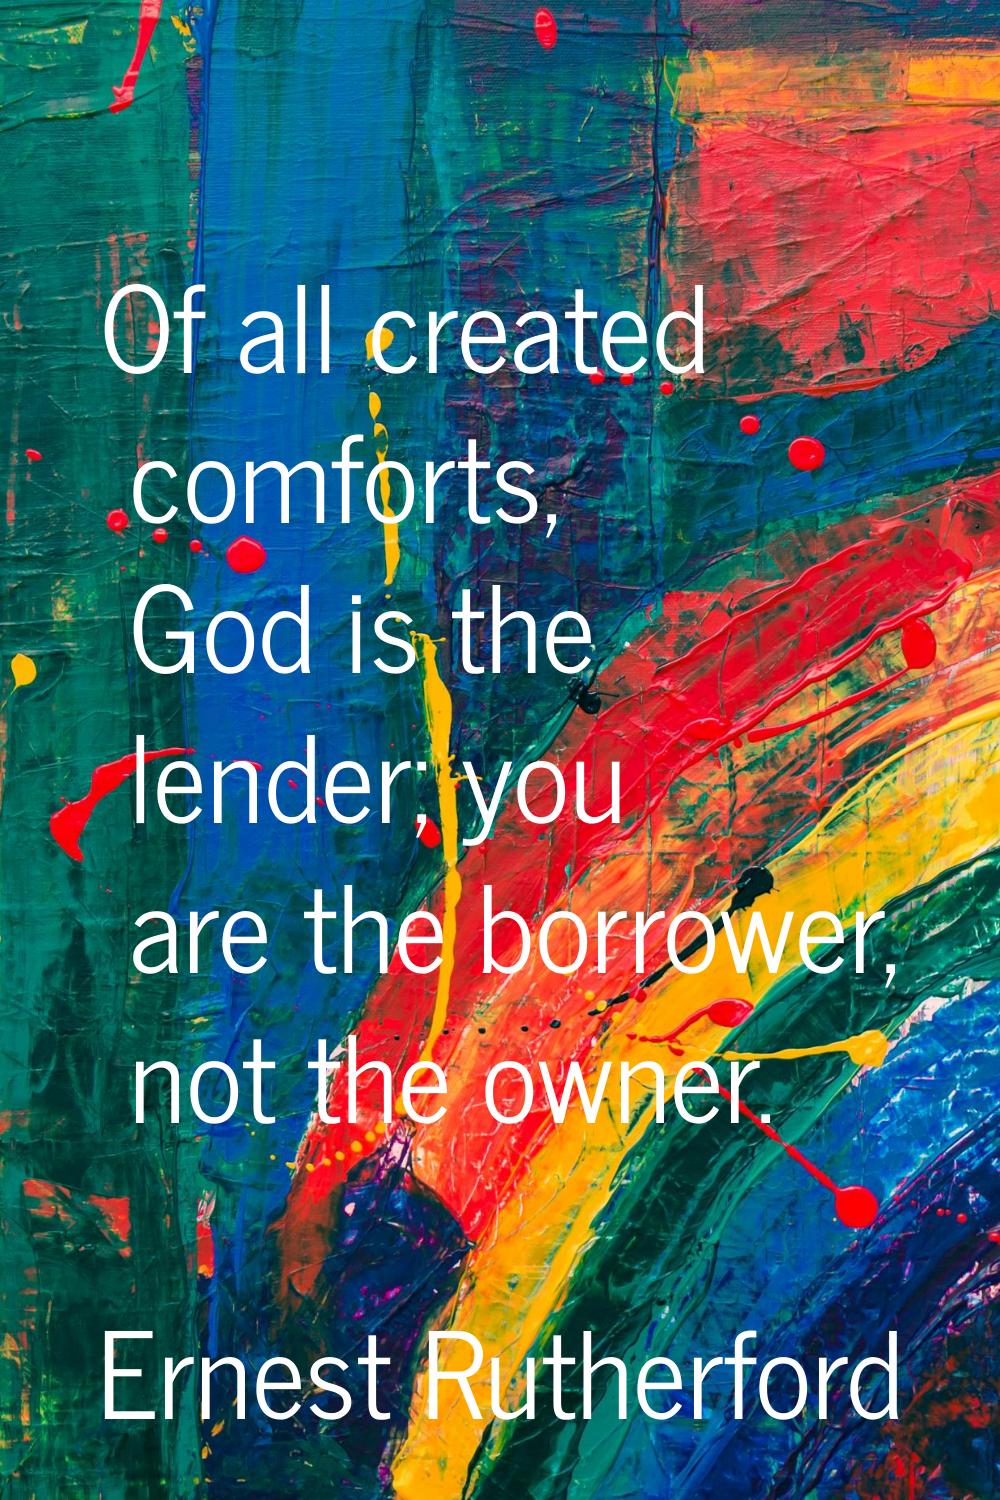 Of all created comforts, God is the lender; you are the borrower, not the owner.